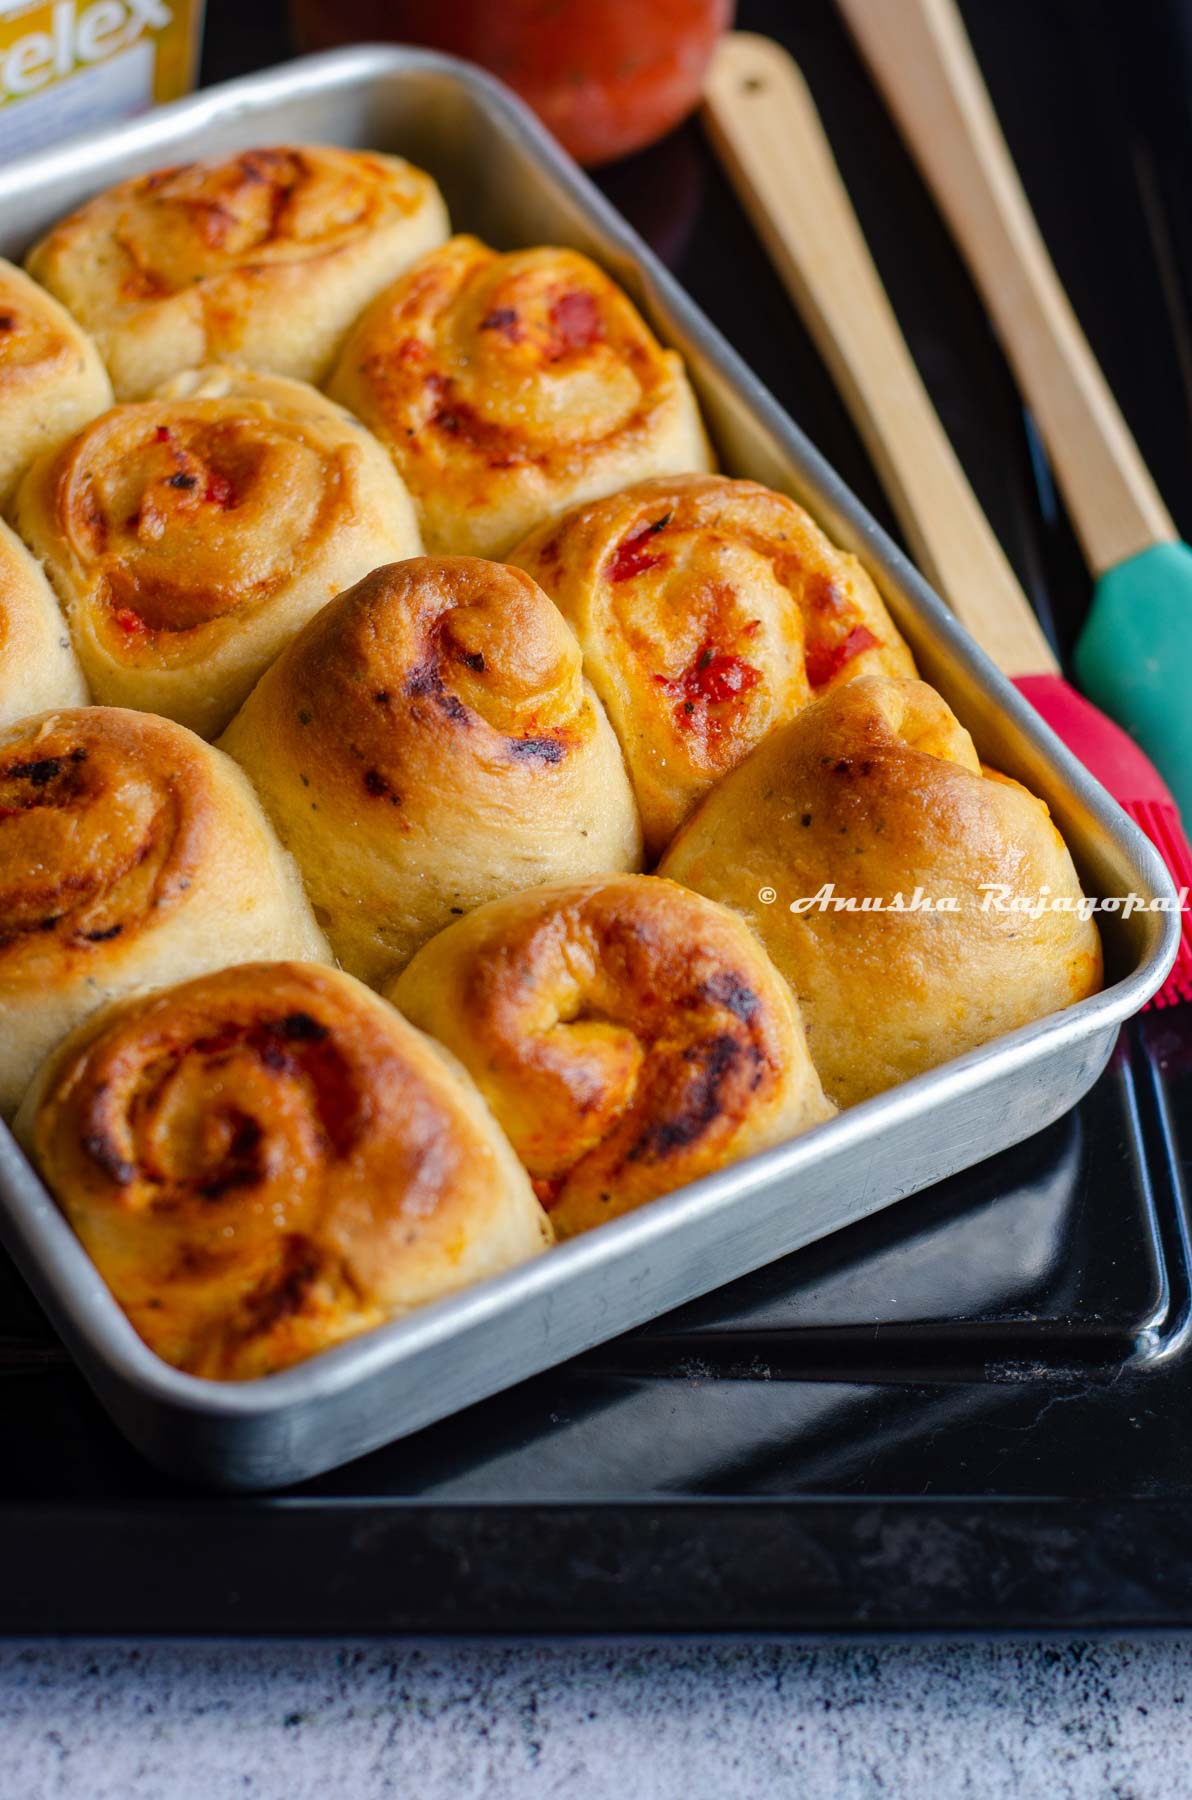 freshly baked pull apart bread with pasta sauce filling in a rectangle shaped baking tray. Spatulas by the side.